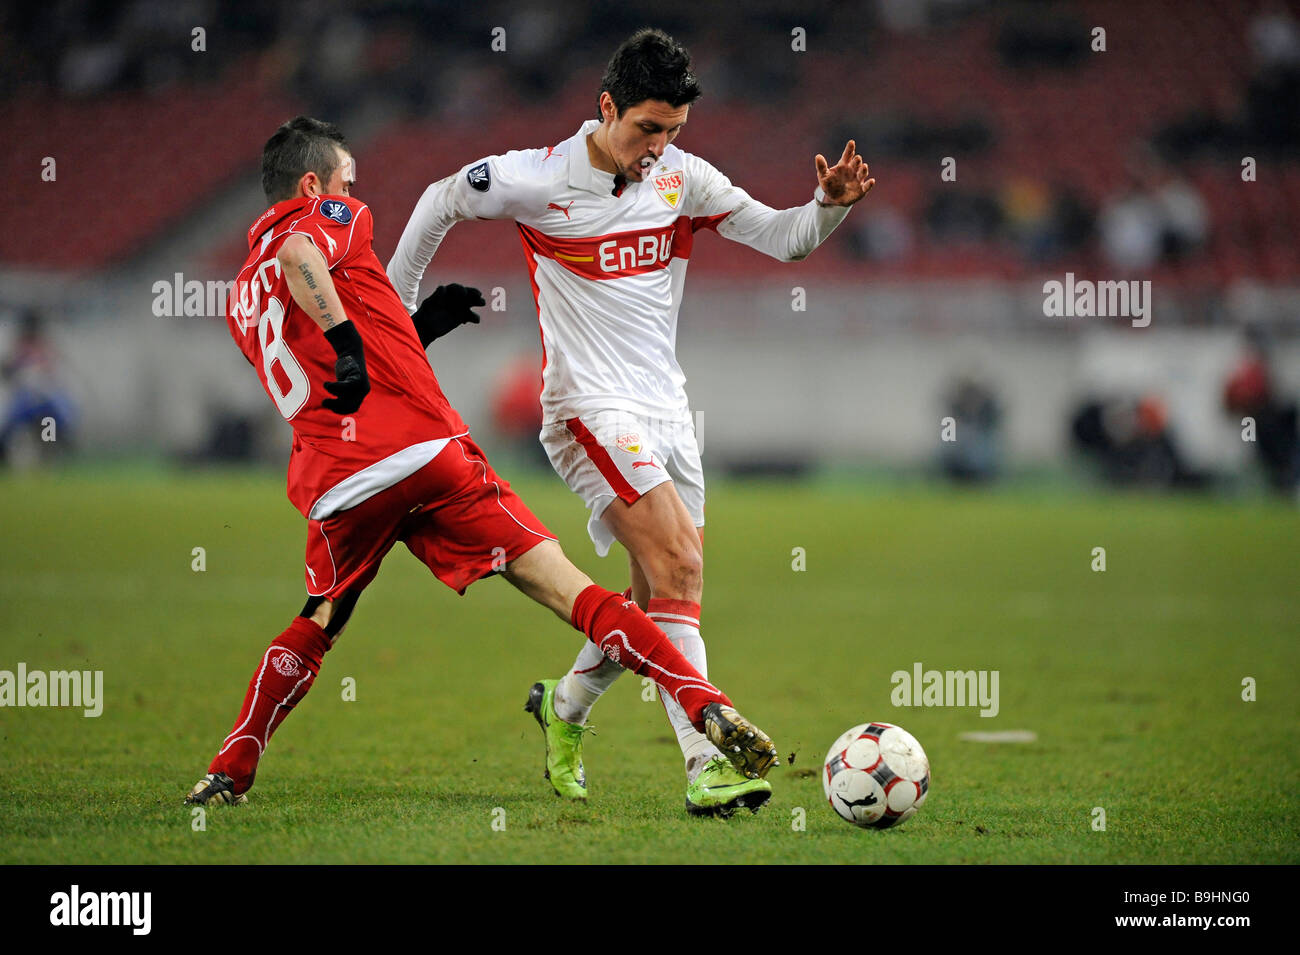 UEFA-Cup tackle, Ciprian MARICA VfB Stuttgart on the right, against Steven DEFOUR, Standard Luettich Stock Photo